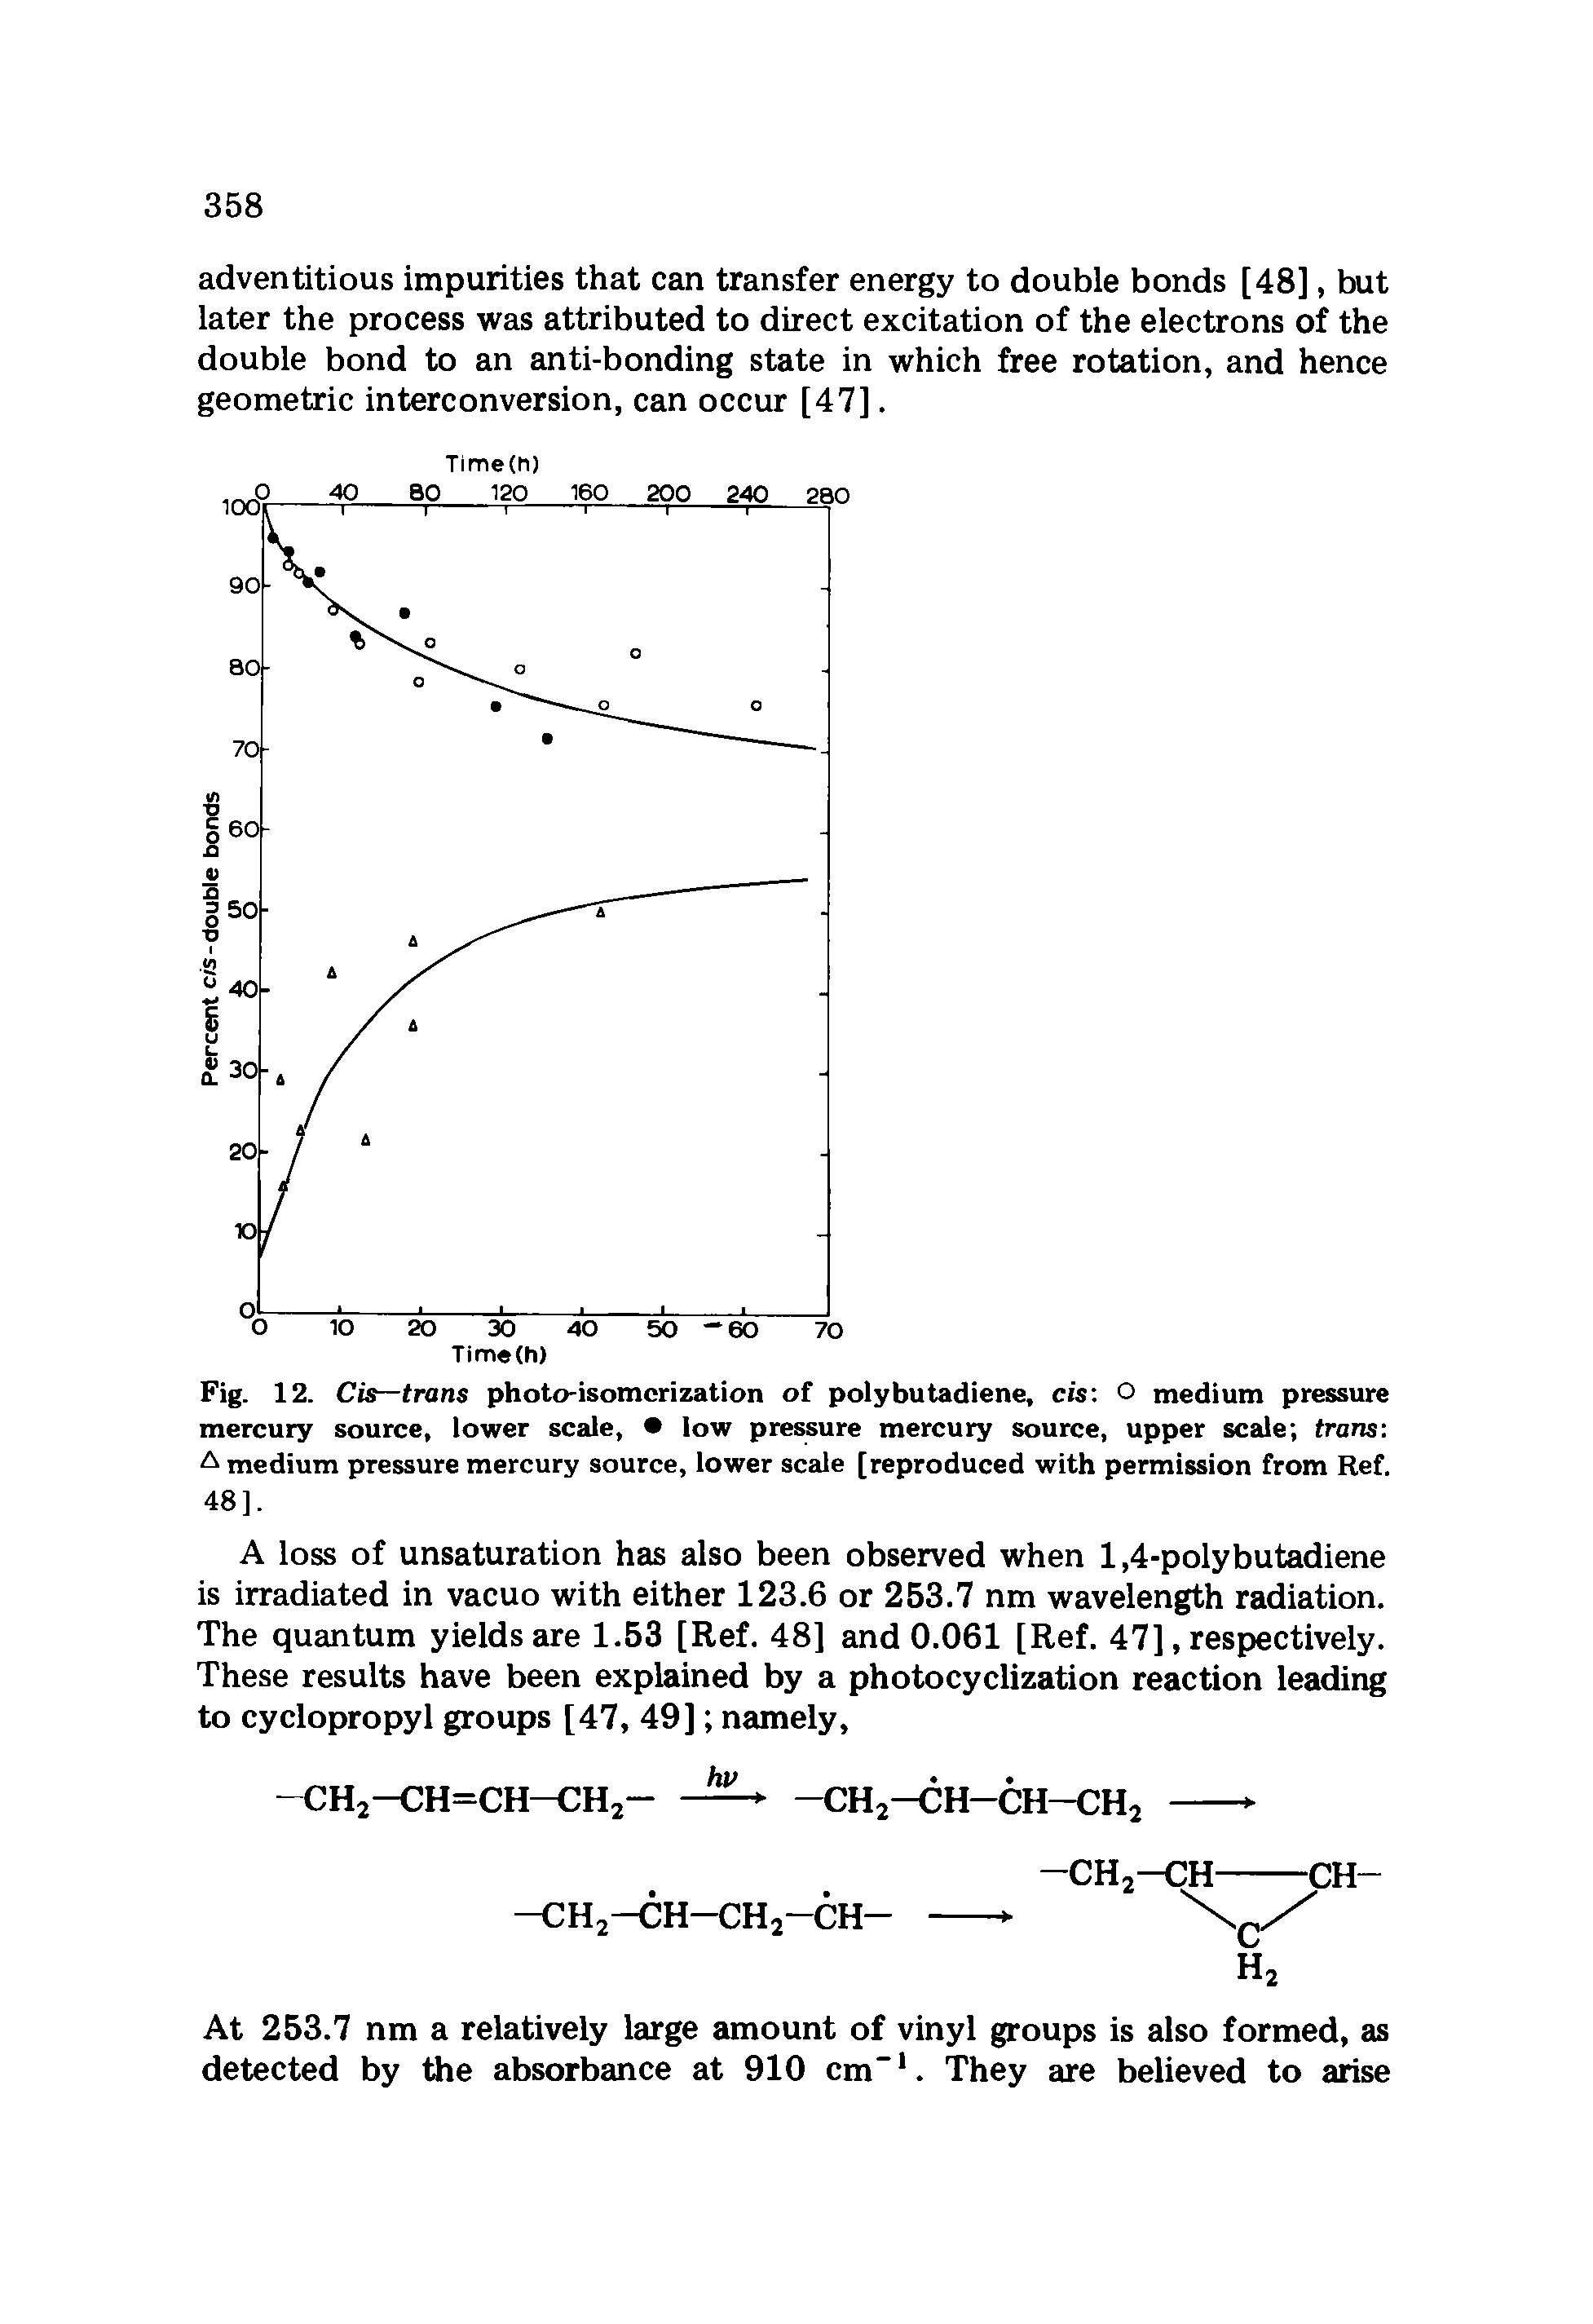 Fig. 12. Cis—trans photo-isomerization of poly butadiene, cis O medium pressure mercury source, lower scale, low pressure mercury source, upper scale trans A medium pressure mercury source, lower scale [reproduced with permission from Ref. 48].